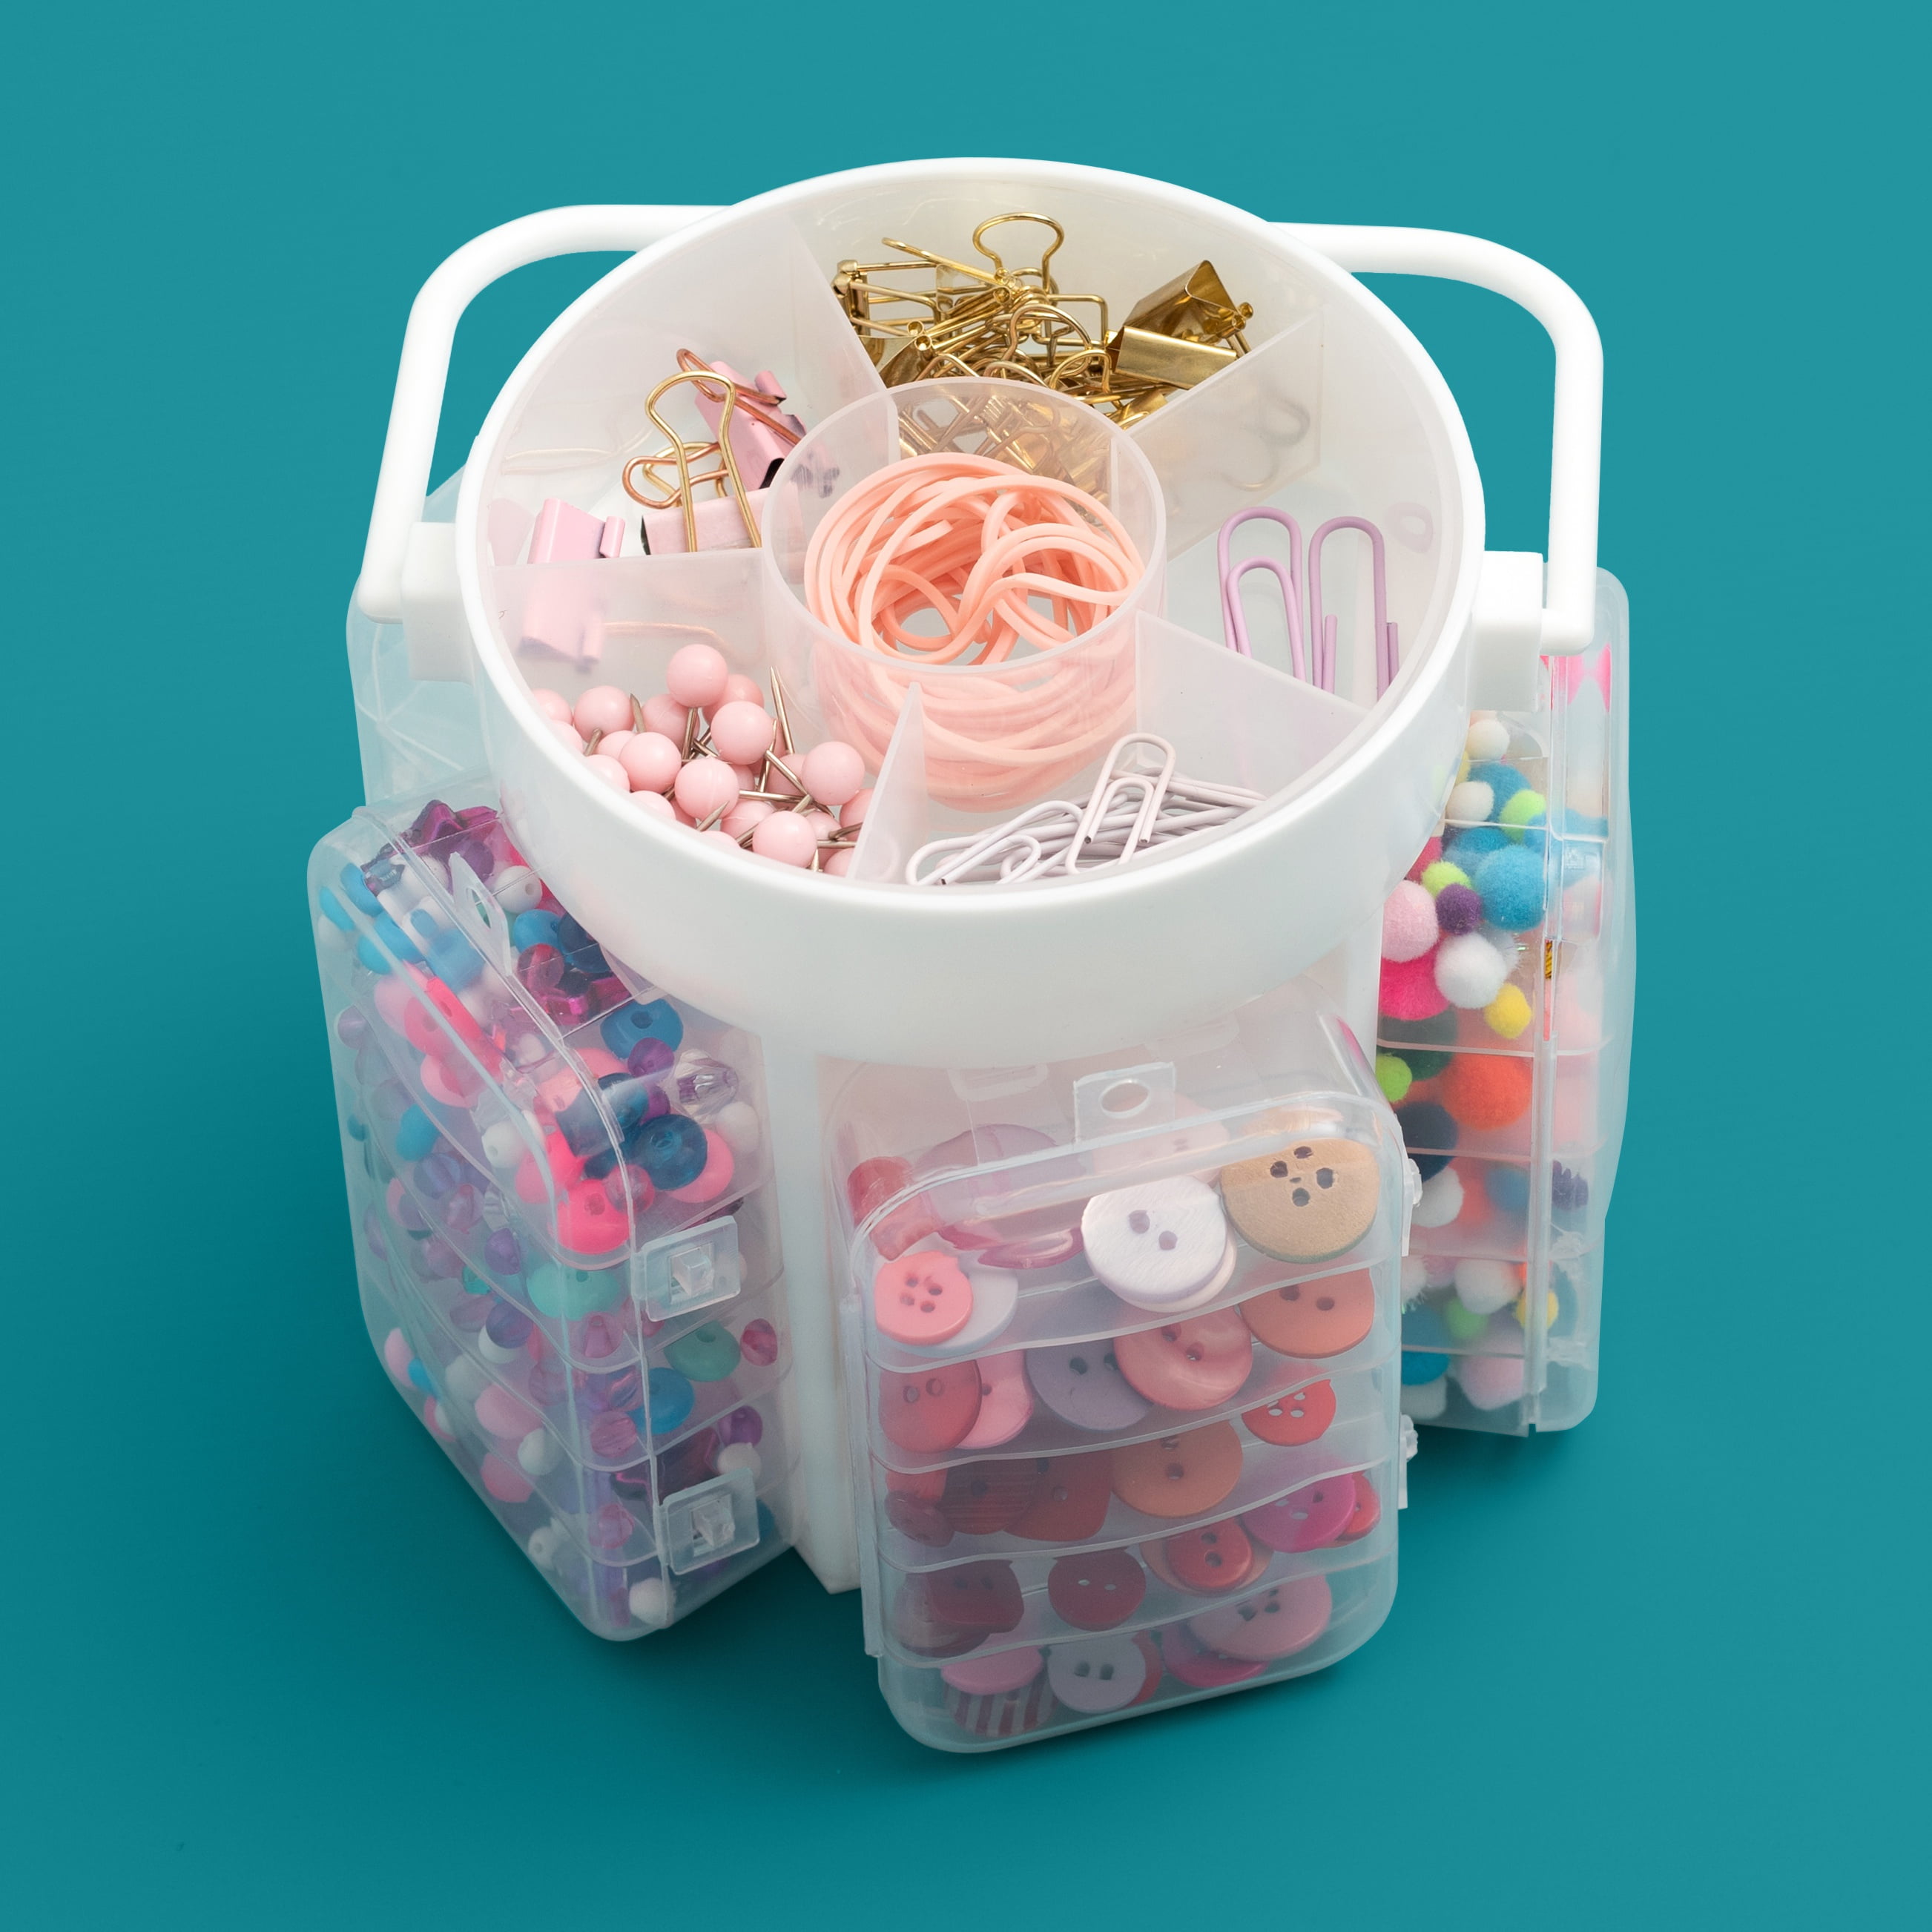 We R Memory Keepers® 3-Tier Snap Box Translucent Plastic Storage Case